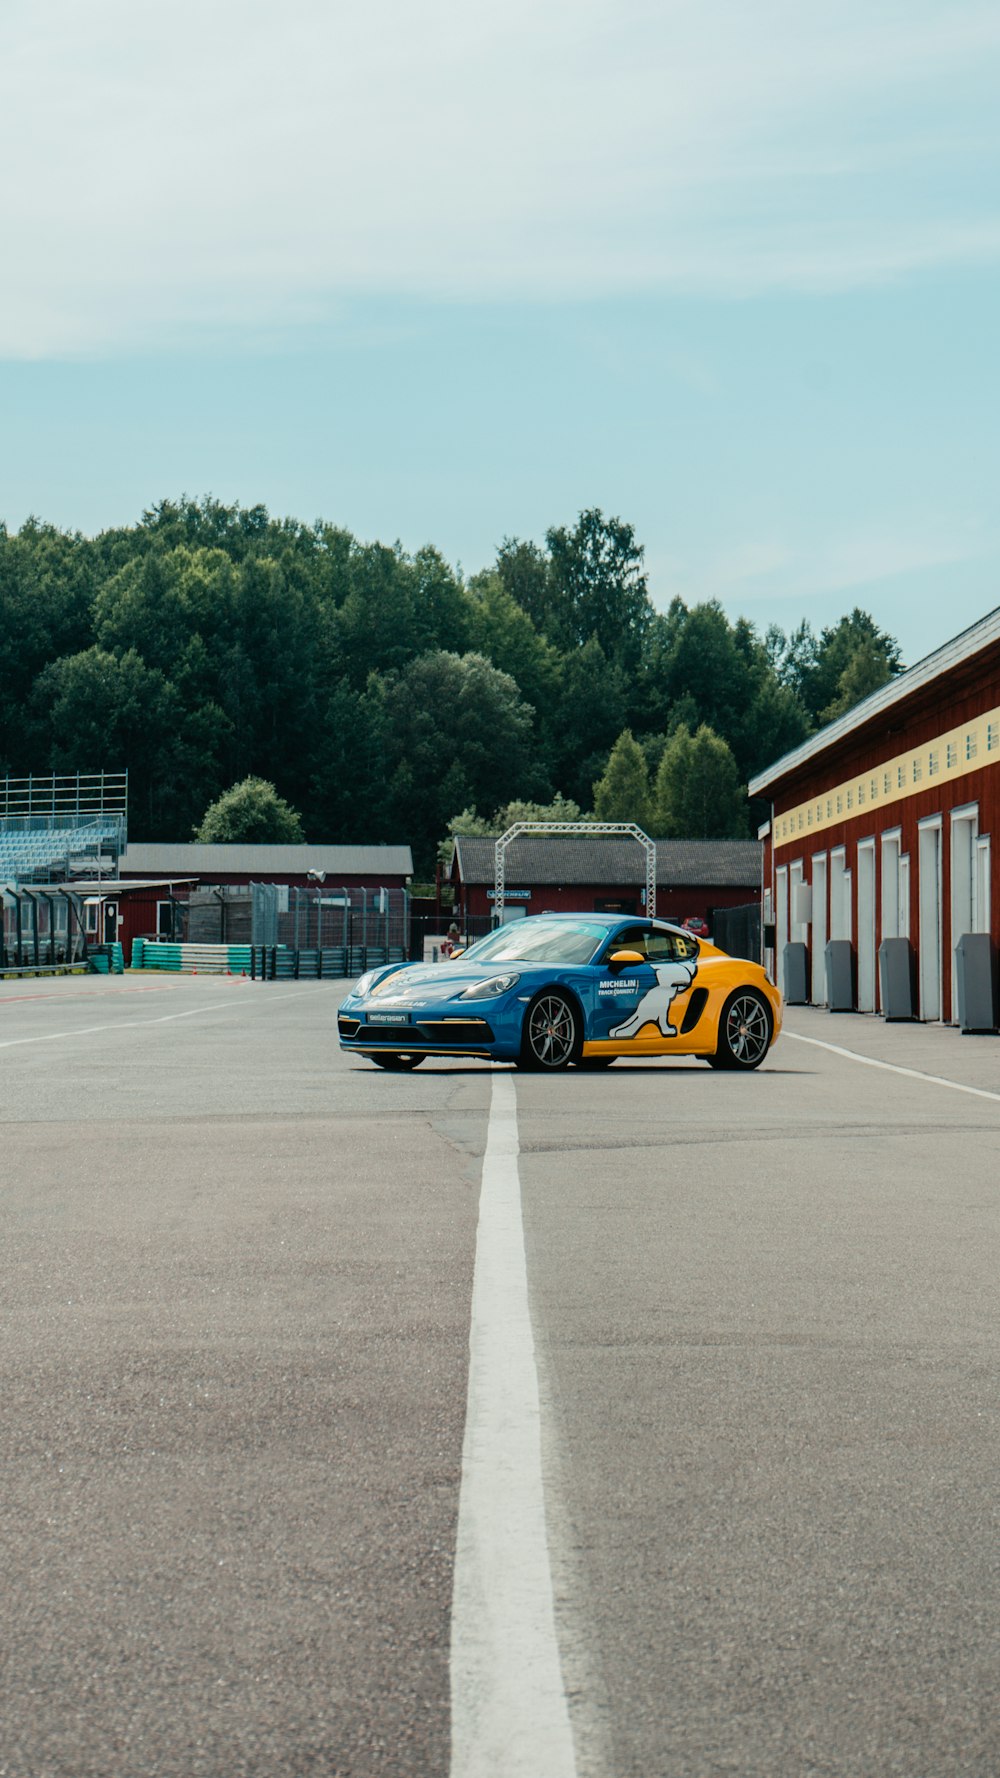 a blue and yellow sports car parked in a parking lot